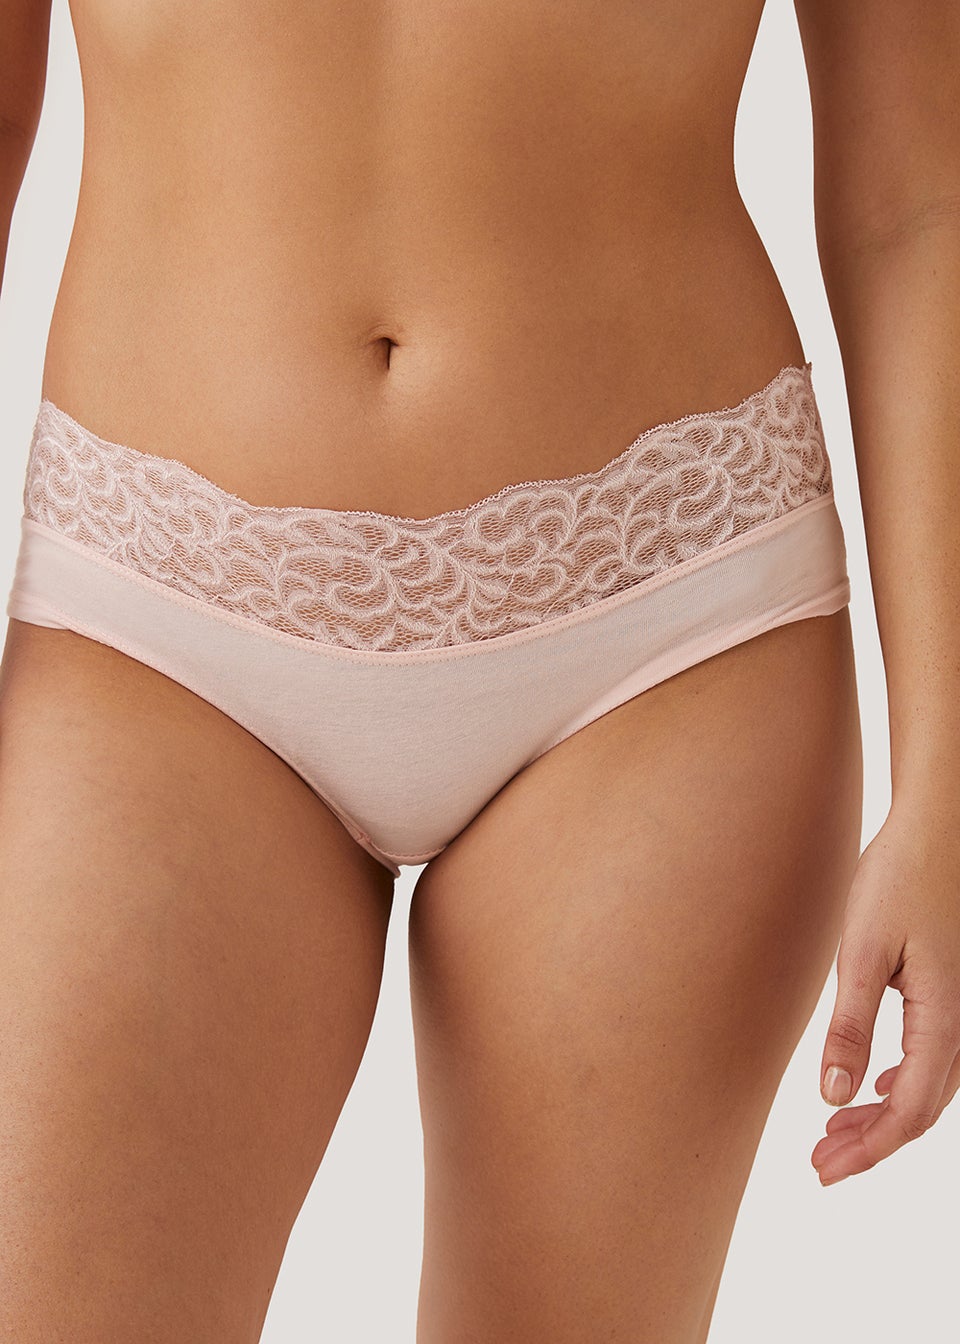 5 Pack Lace Trim Short Knickers